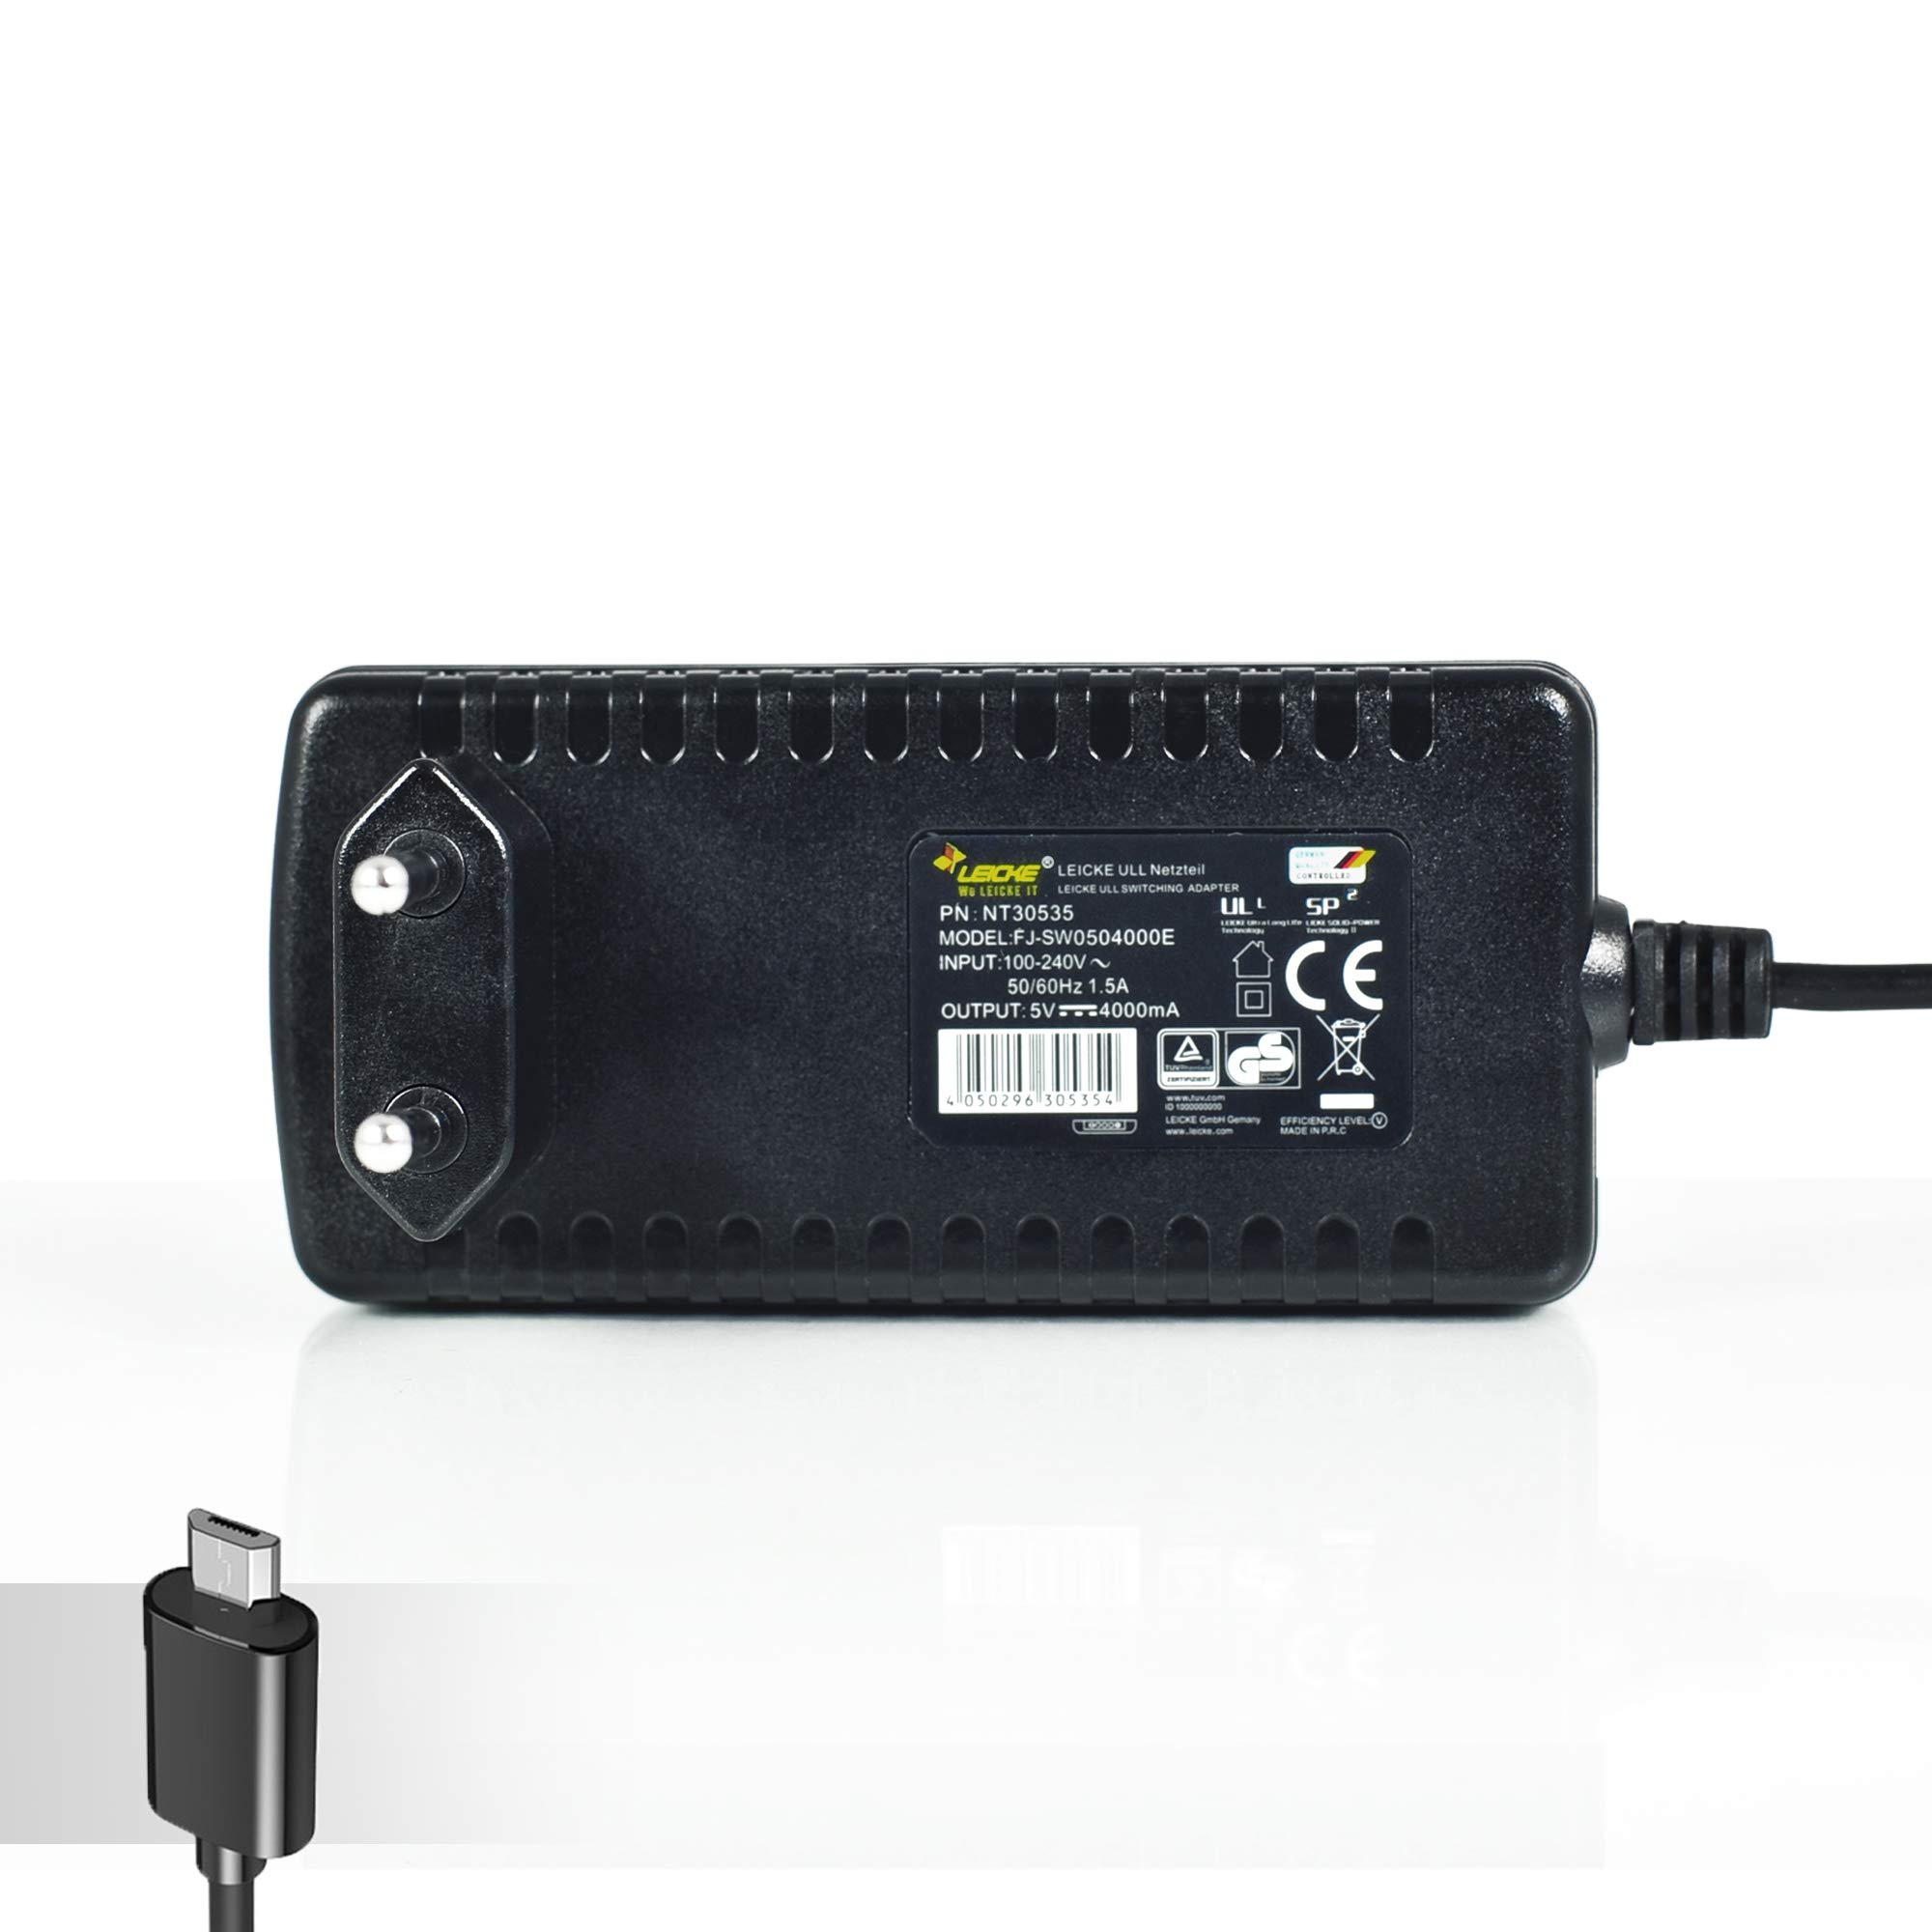 Micro Netzteil,Charger Power-Switch, Mit LEICKE 5V USB 4A Netzteil 20W